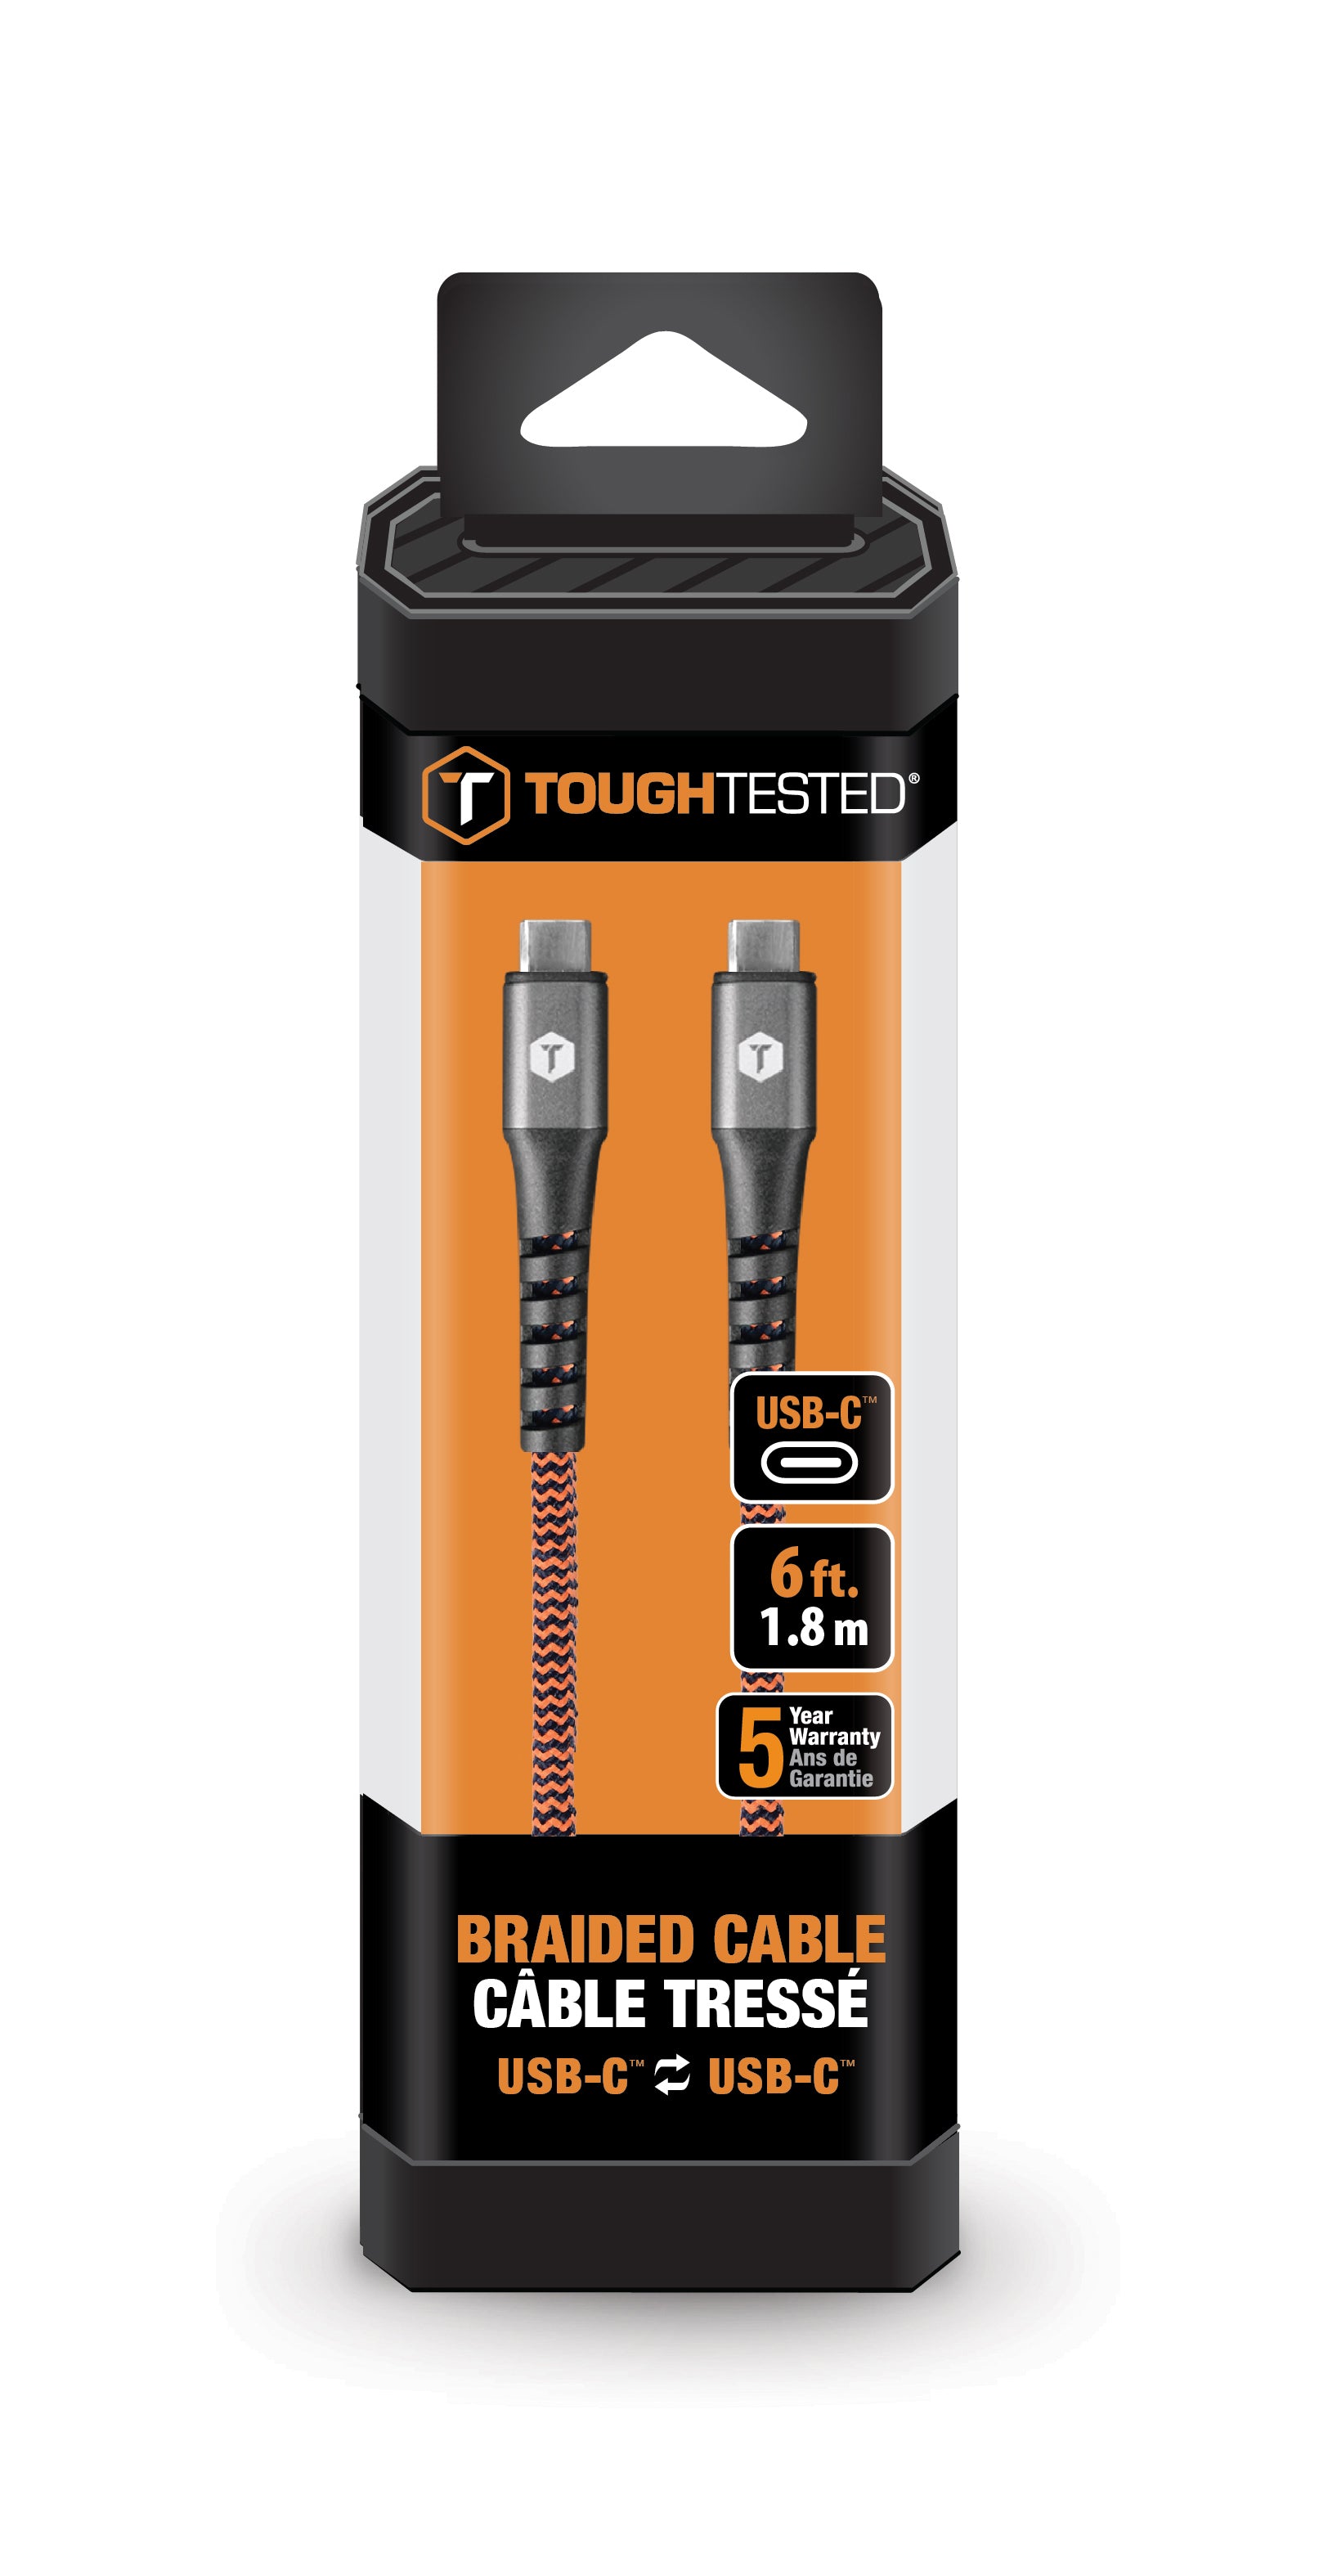 Braided 6 Ft. USB-C to USB-C Cable